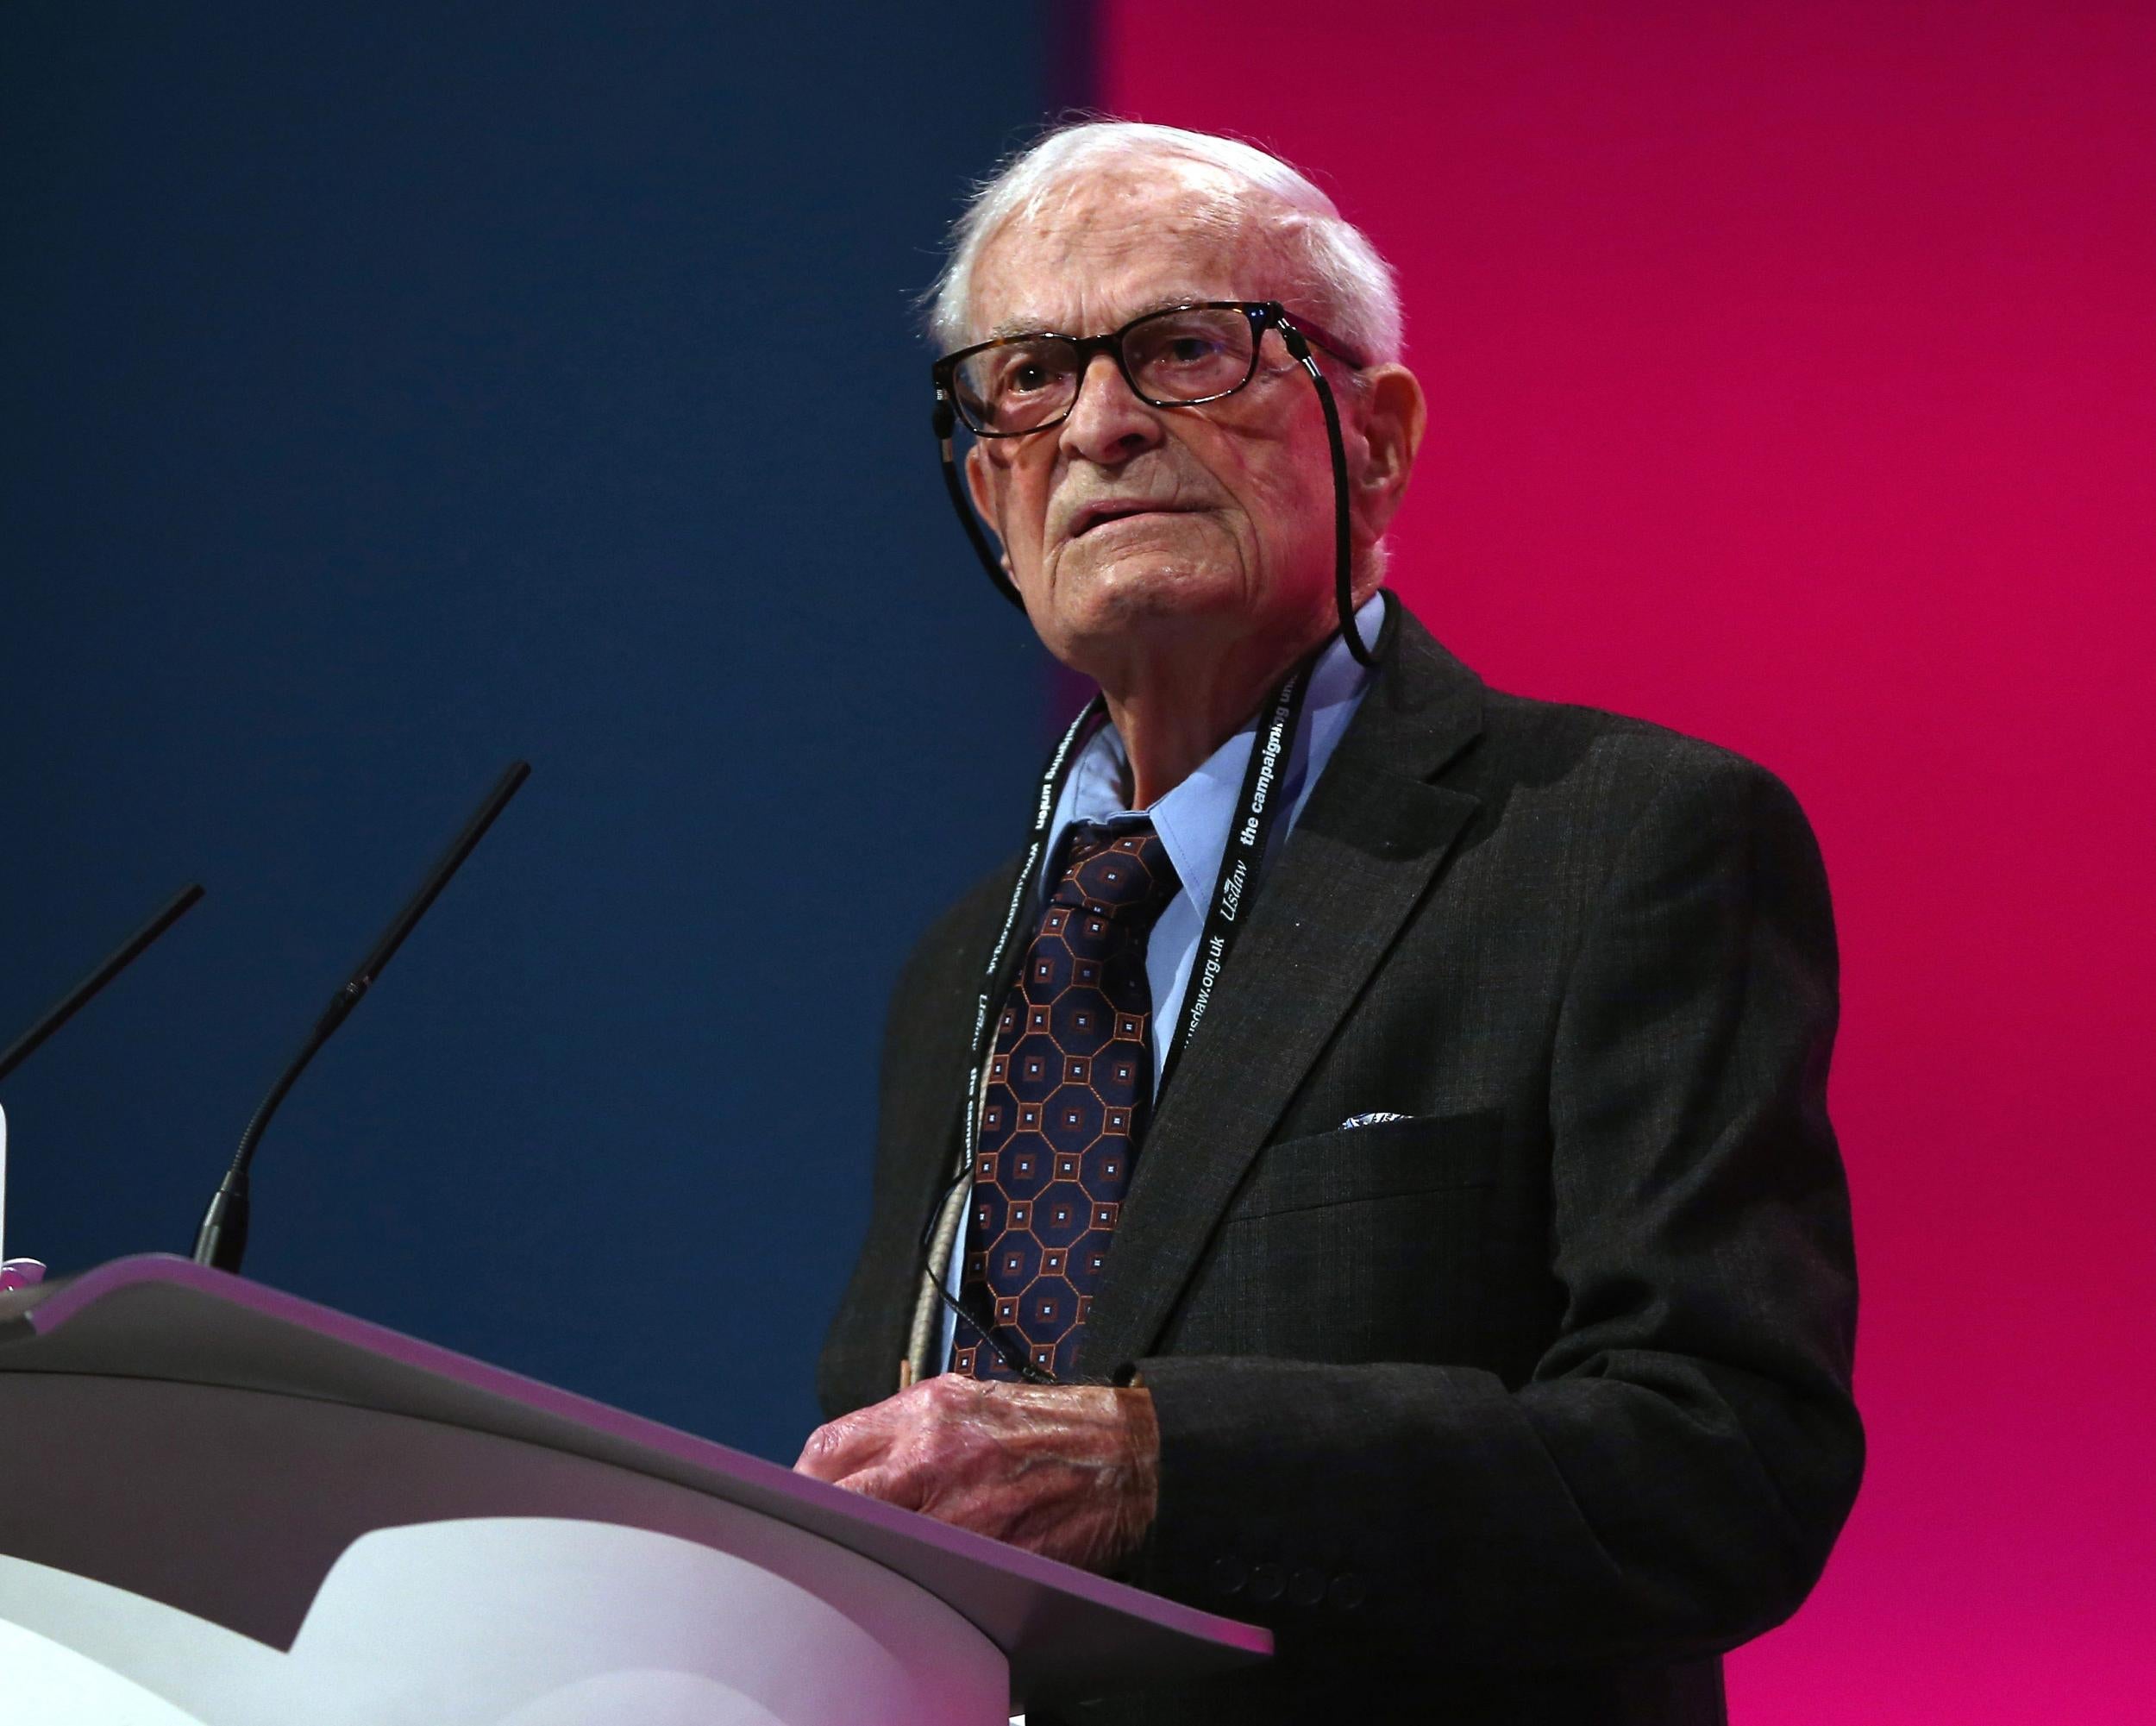 Harry Leslie Smith, 92, survived the Great Depression and World War 2, and is an RAF veteran